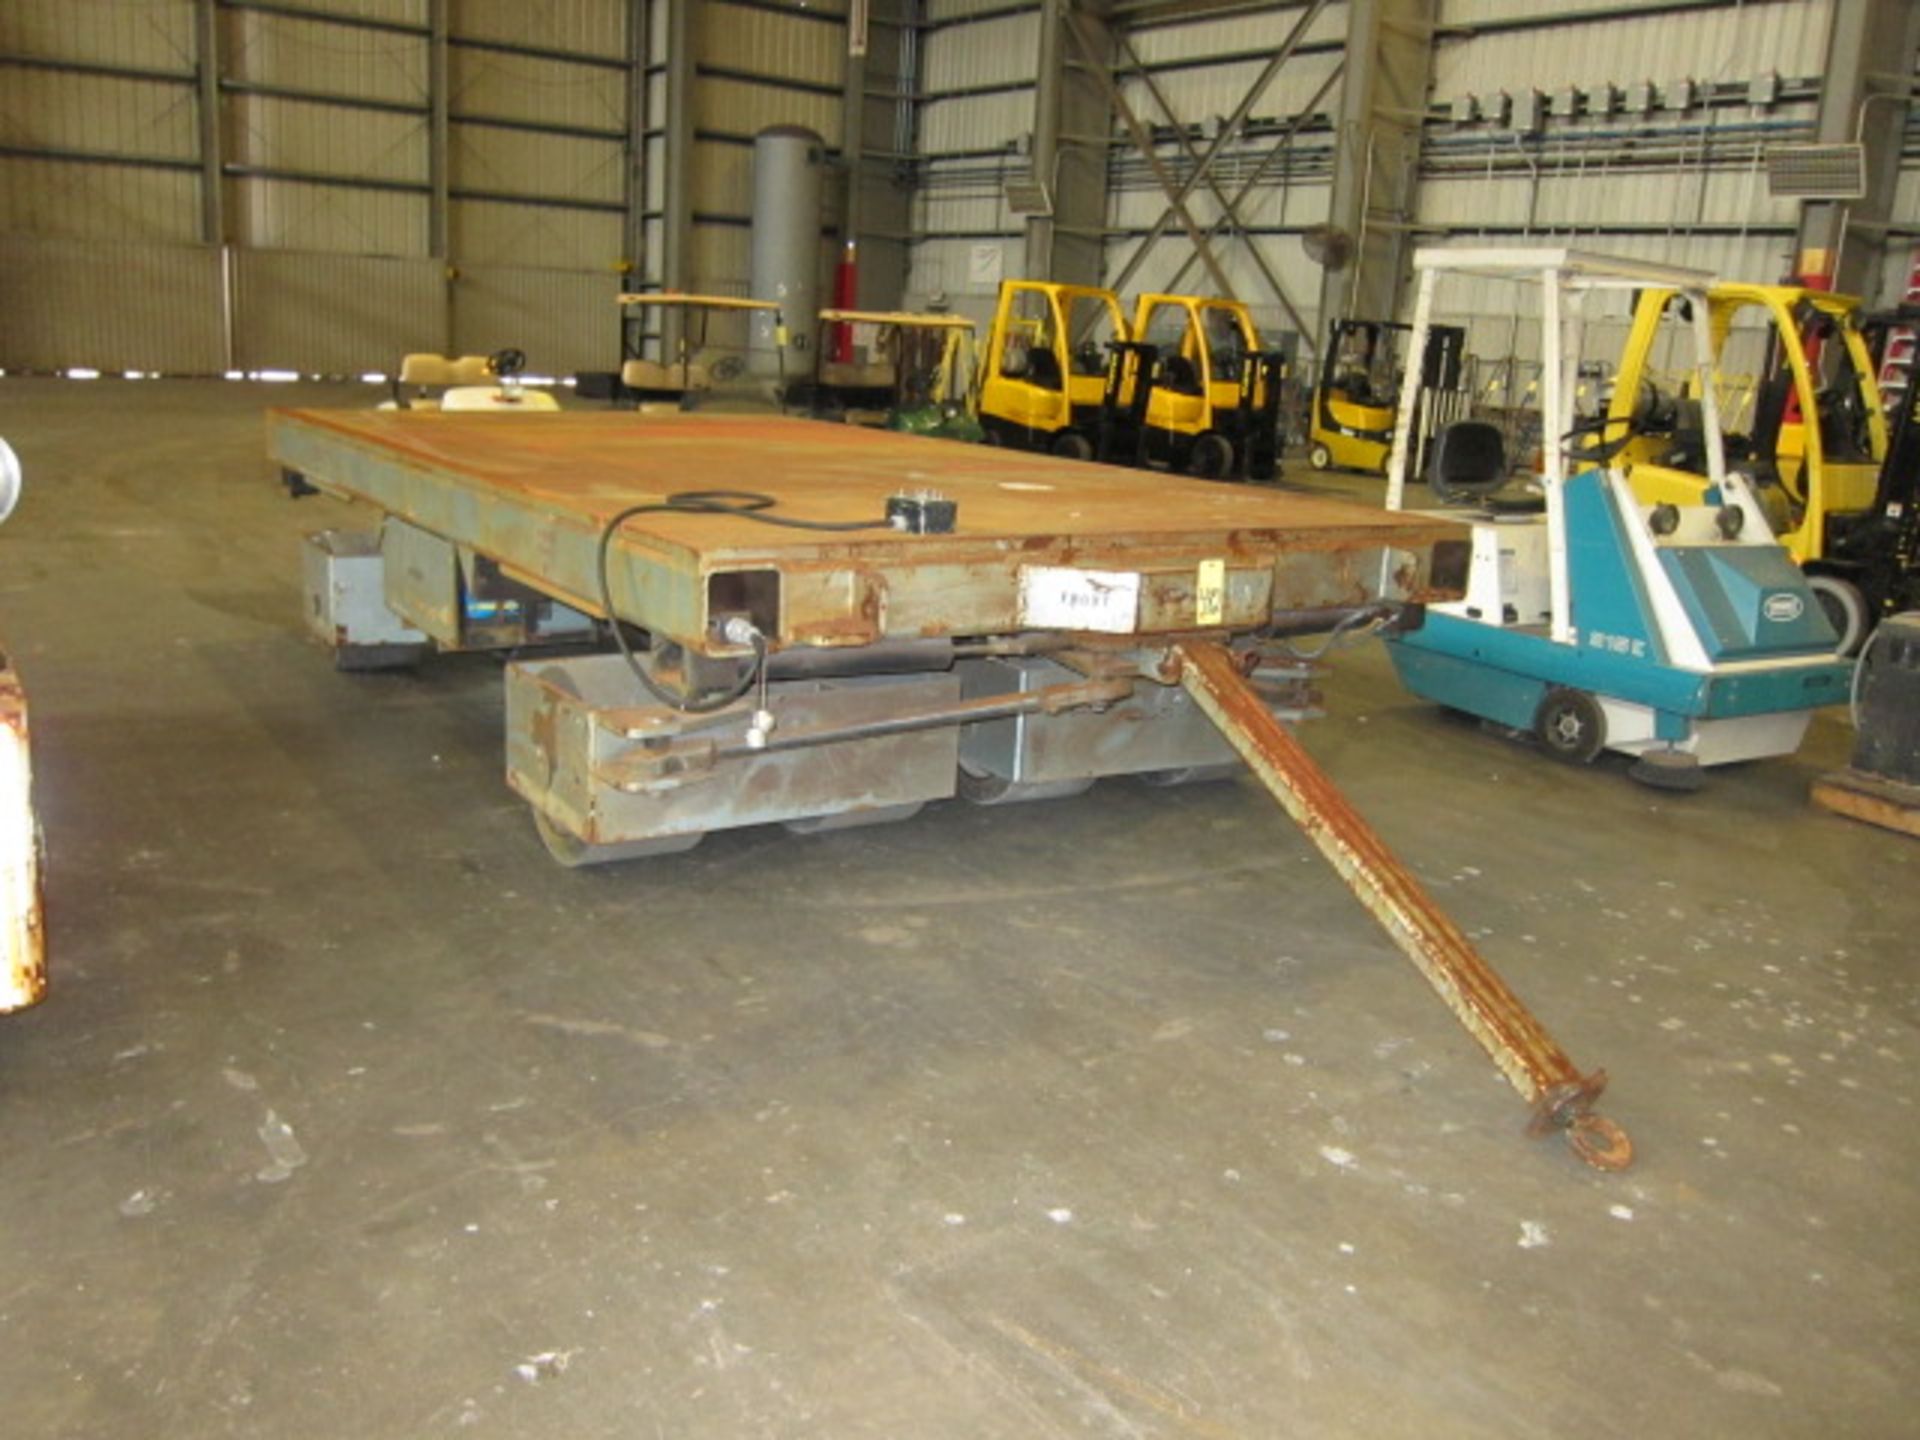 UTILITY TRAILER, for heavy load transport - Image 2 of 4